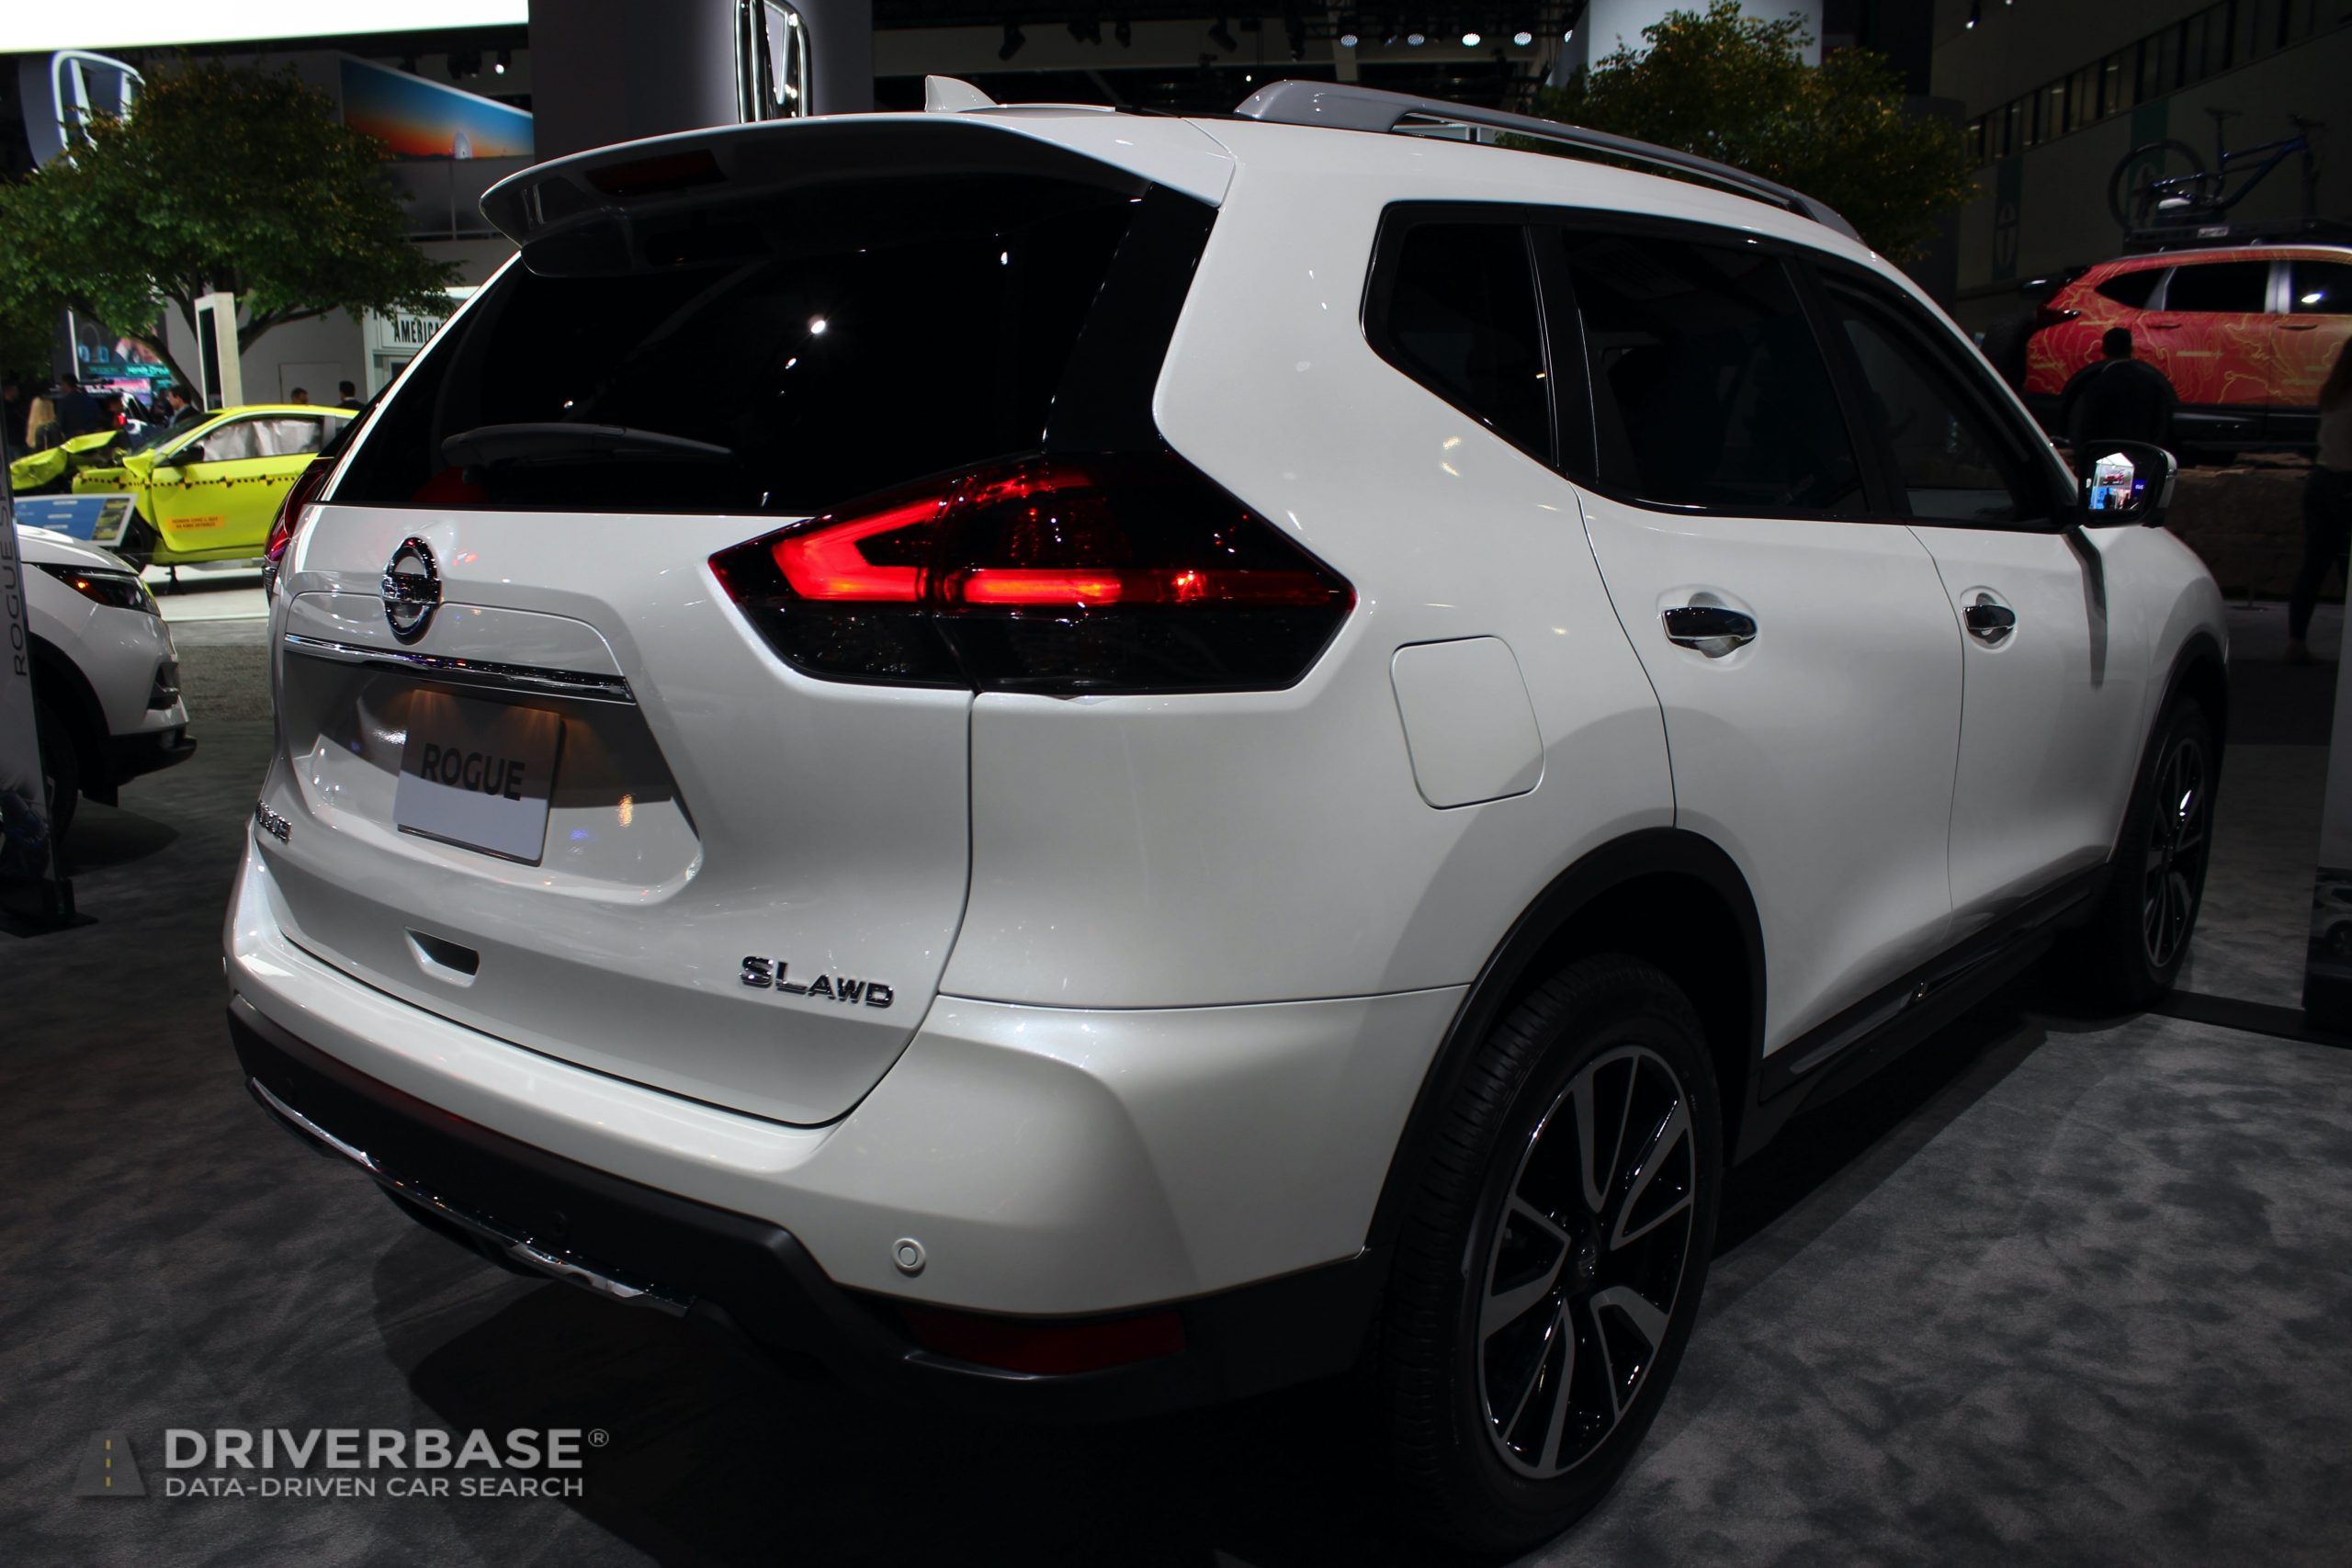 2020 Nissan Rogue SL at the 2019 Los Angeles Auto Show